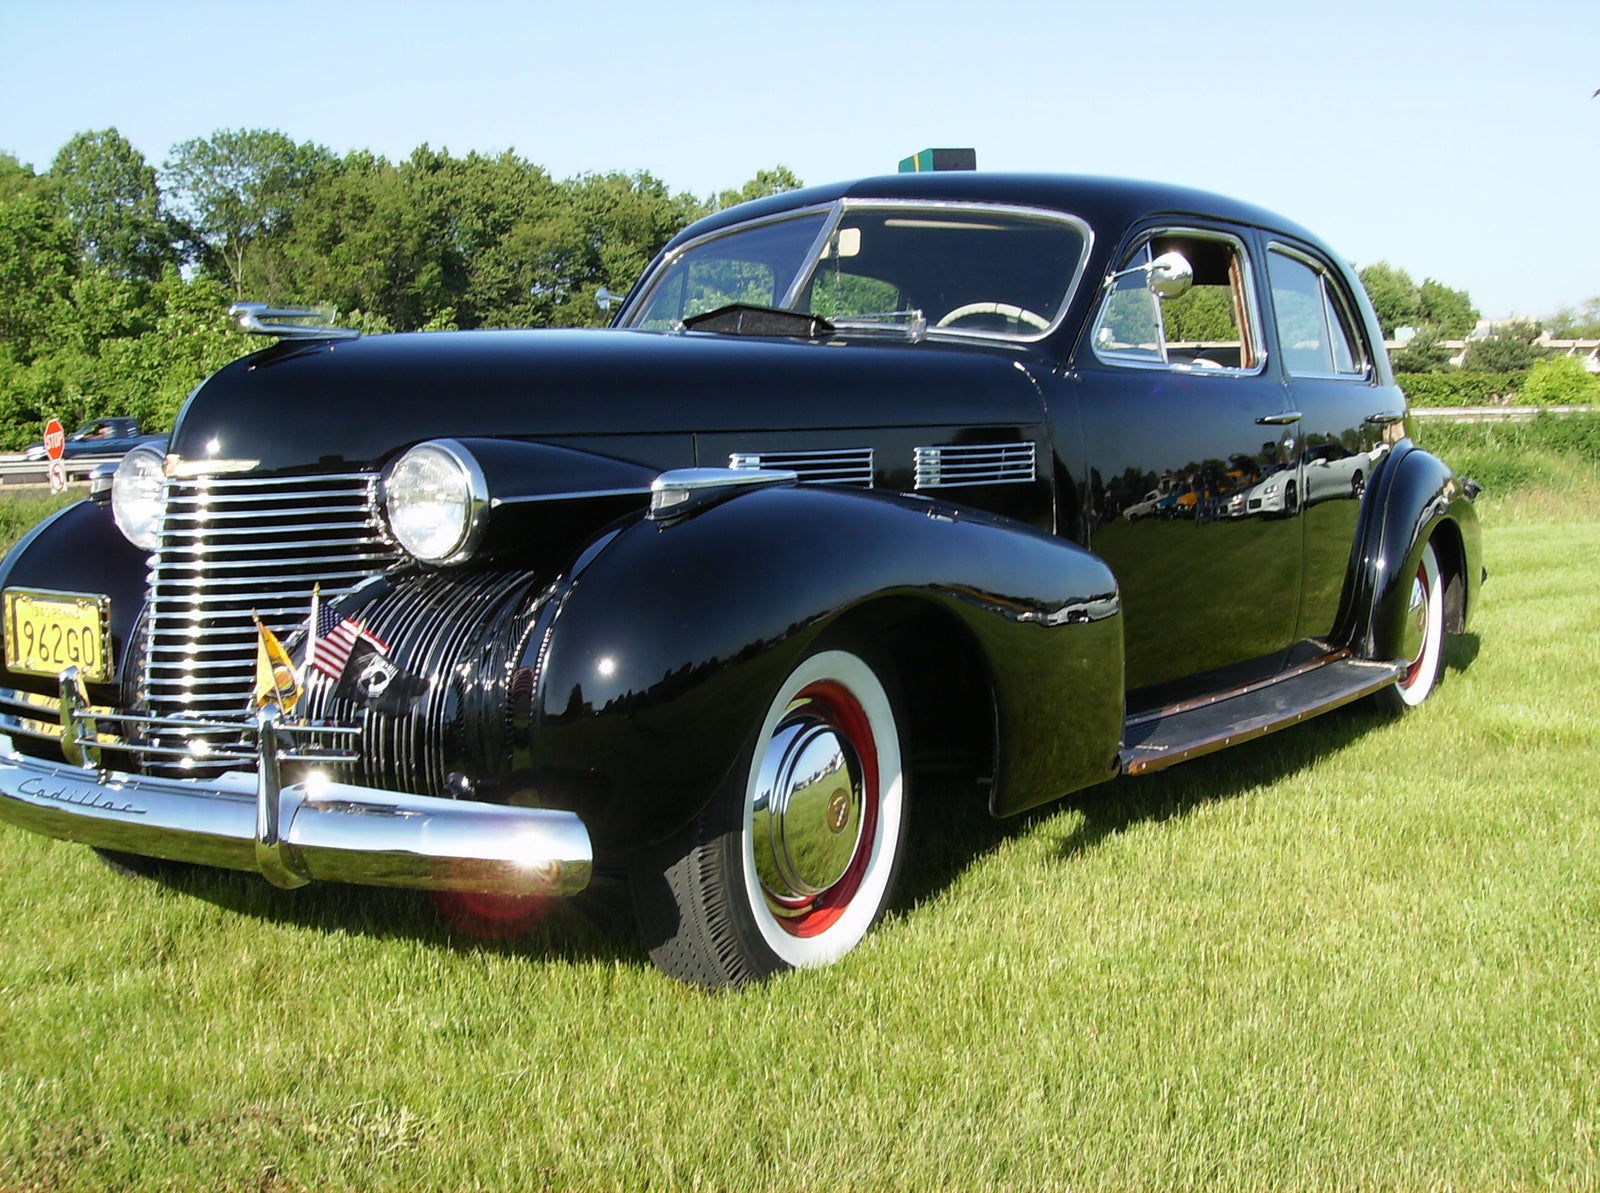 1940 Cadillac Sixty Special - Pictures - 1940 Cadillac Sixty Special ...